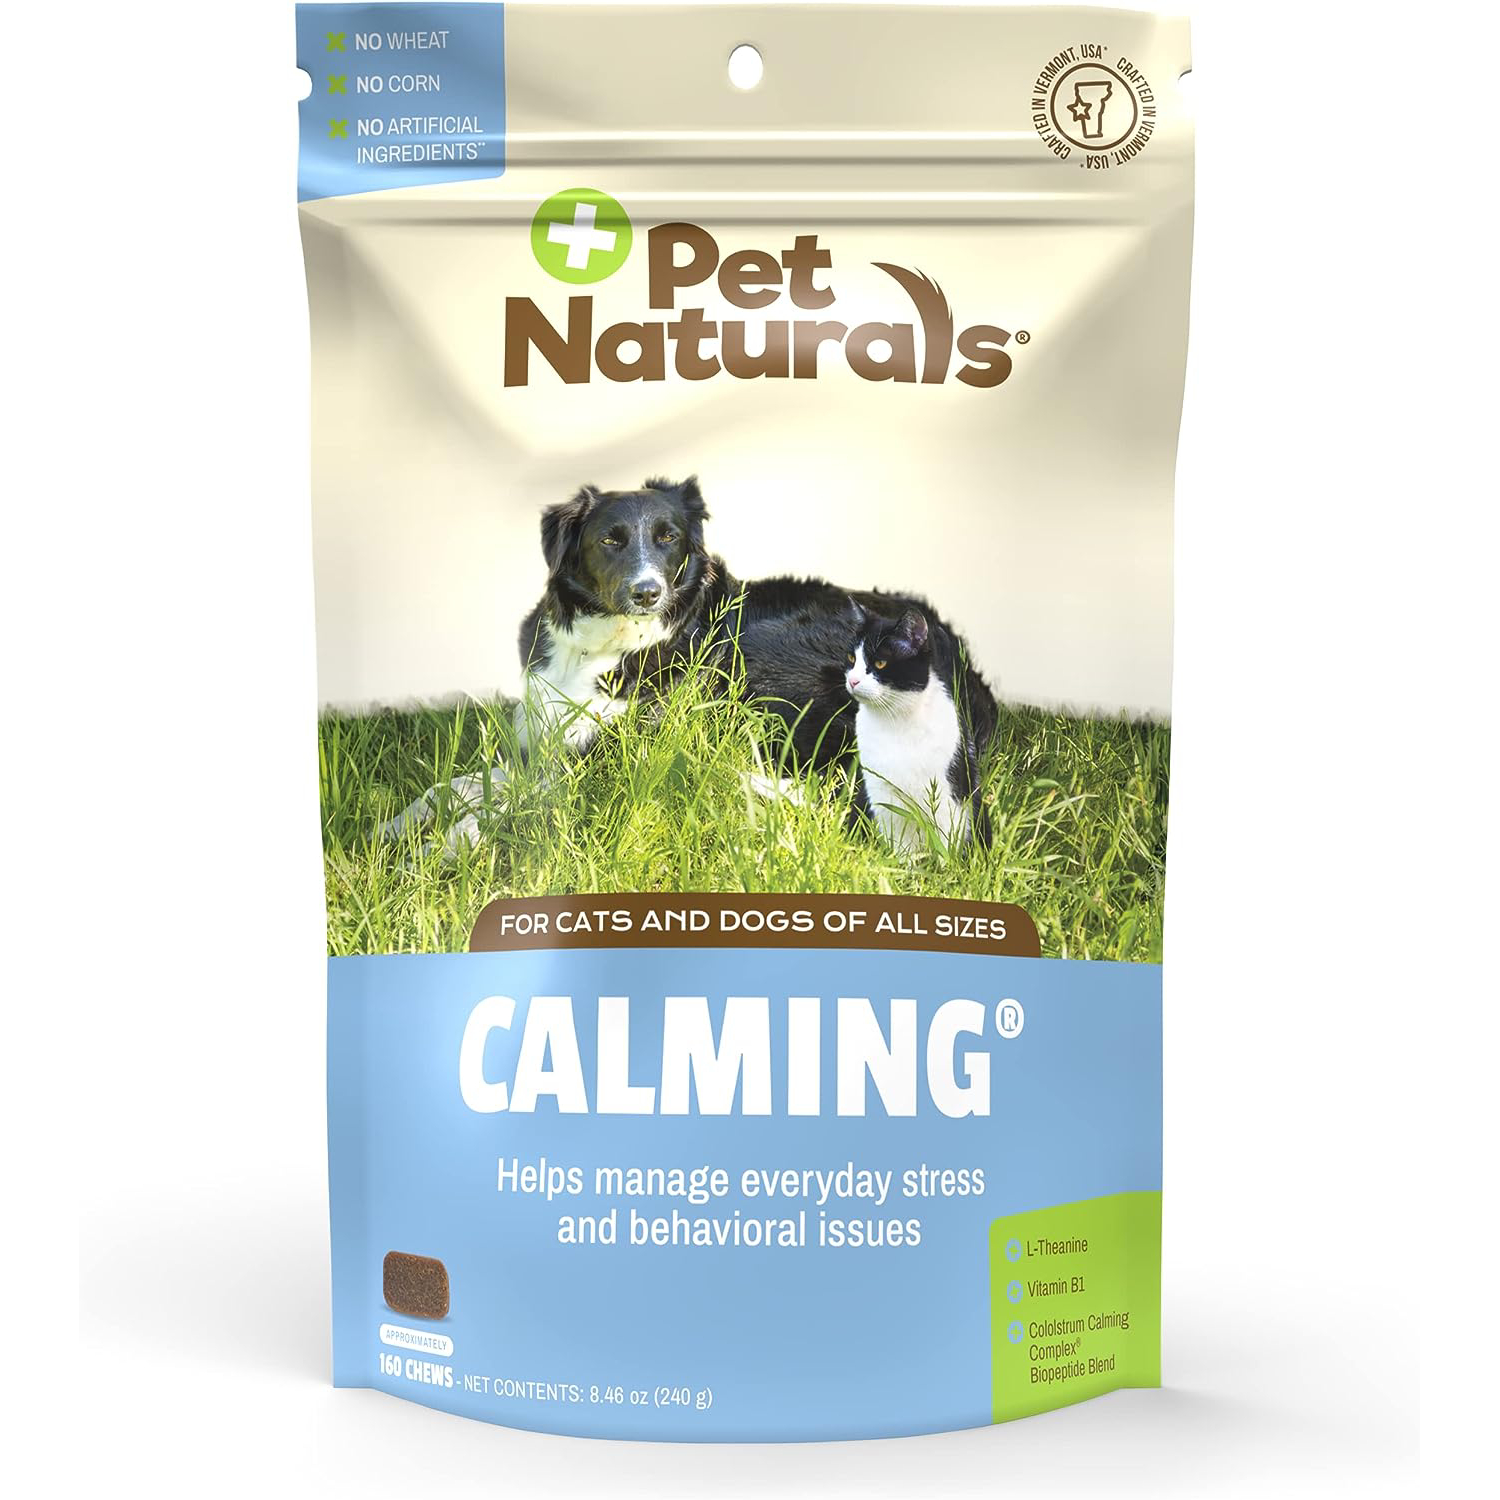 Pet Naturals of Vermont - Calming, Behavioral Support Supplement for Dogs and Cats